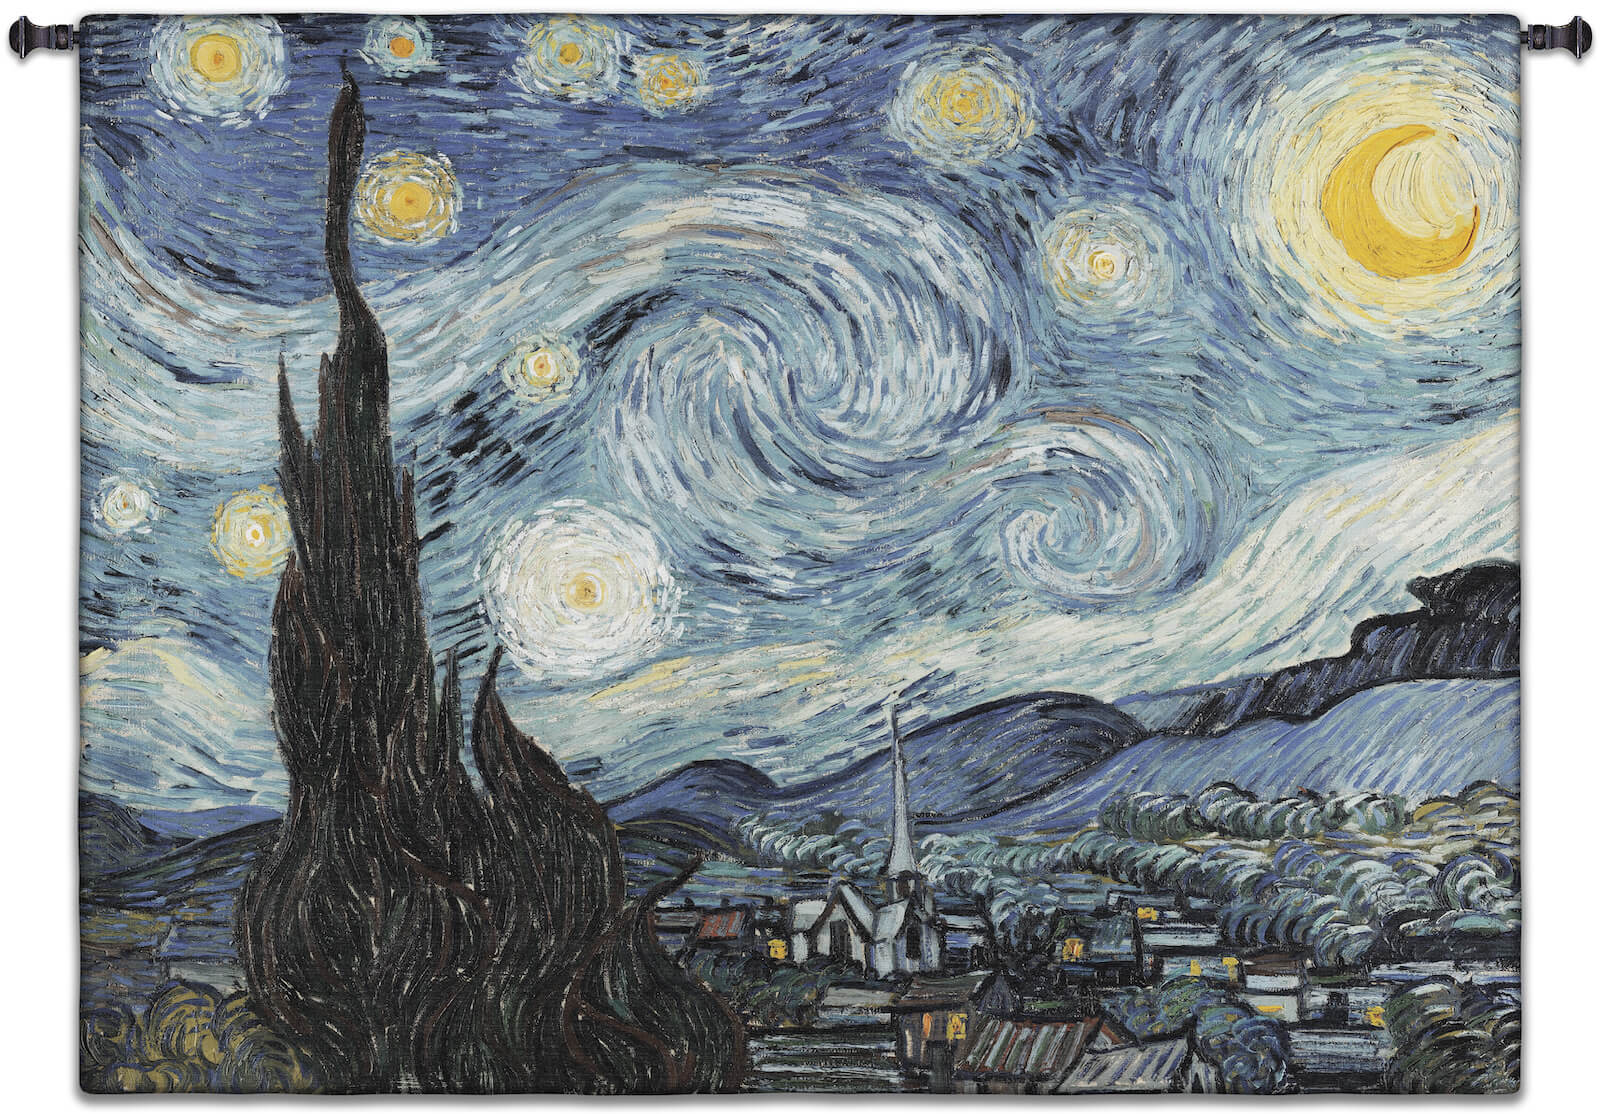 Starry Night Van Gogh Wall Tapestry C-1654, 1654-Wh, 1654C, 1654Wh, 40-49Inchestall, 40H, 50-59Incheswide, 53W, Abstract, Art, Artist, Ashley, S, Black, Blue, Border, Carolina, USAwoven, Contemporary, Cotton, Famous, Gogh, Gold, Hanging, Horizontal, Masterpiece, Masterpieces, Modern, Night, Old, Painting, Paintings, Seller, Starry, Tapastry, Tapestries, Tapestry, Tapistry, Top50, Van, Vincent, Wall, Woven, Yellow, Yellow, Bestseller, tapestries, tapestrys, hangings, and, the